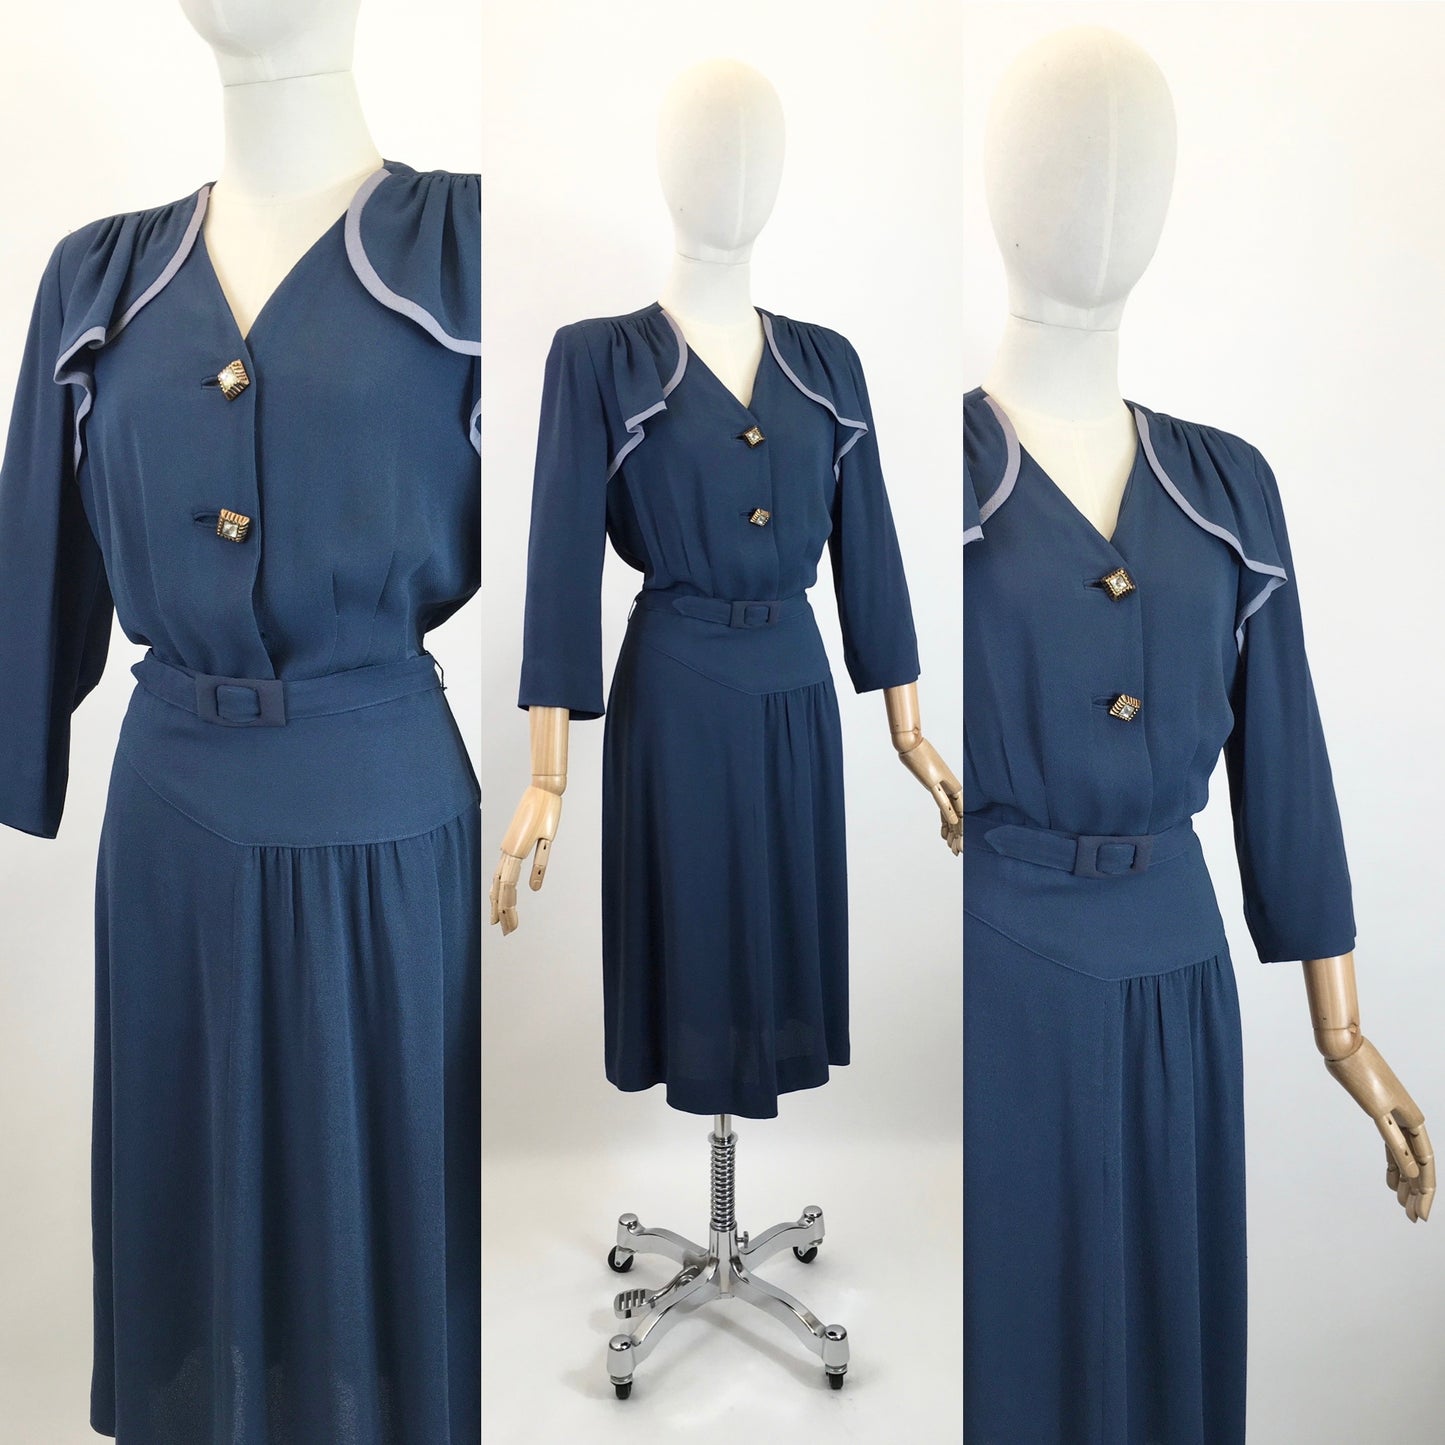 Original 1940's Sublime Two Tone Crepe Dress With Illusion Cape - In Contrast Airforce & Powder Blue